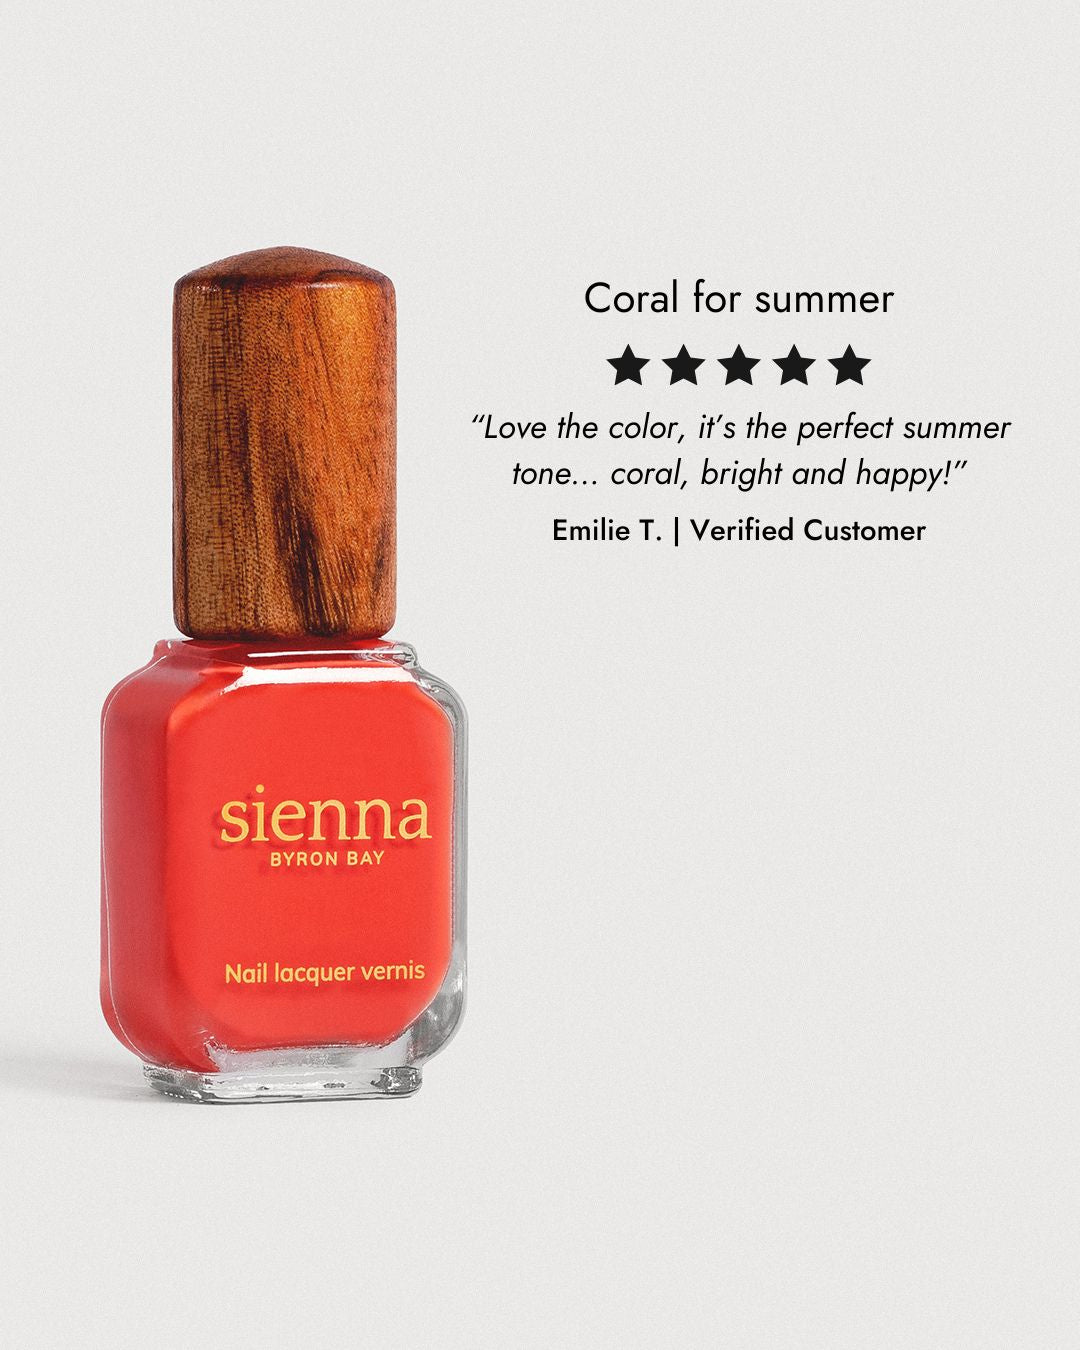 Warm strawberry red nail polish glass bottle with 5 star review